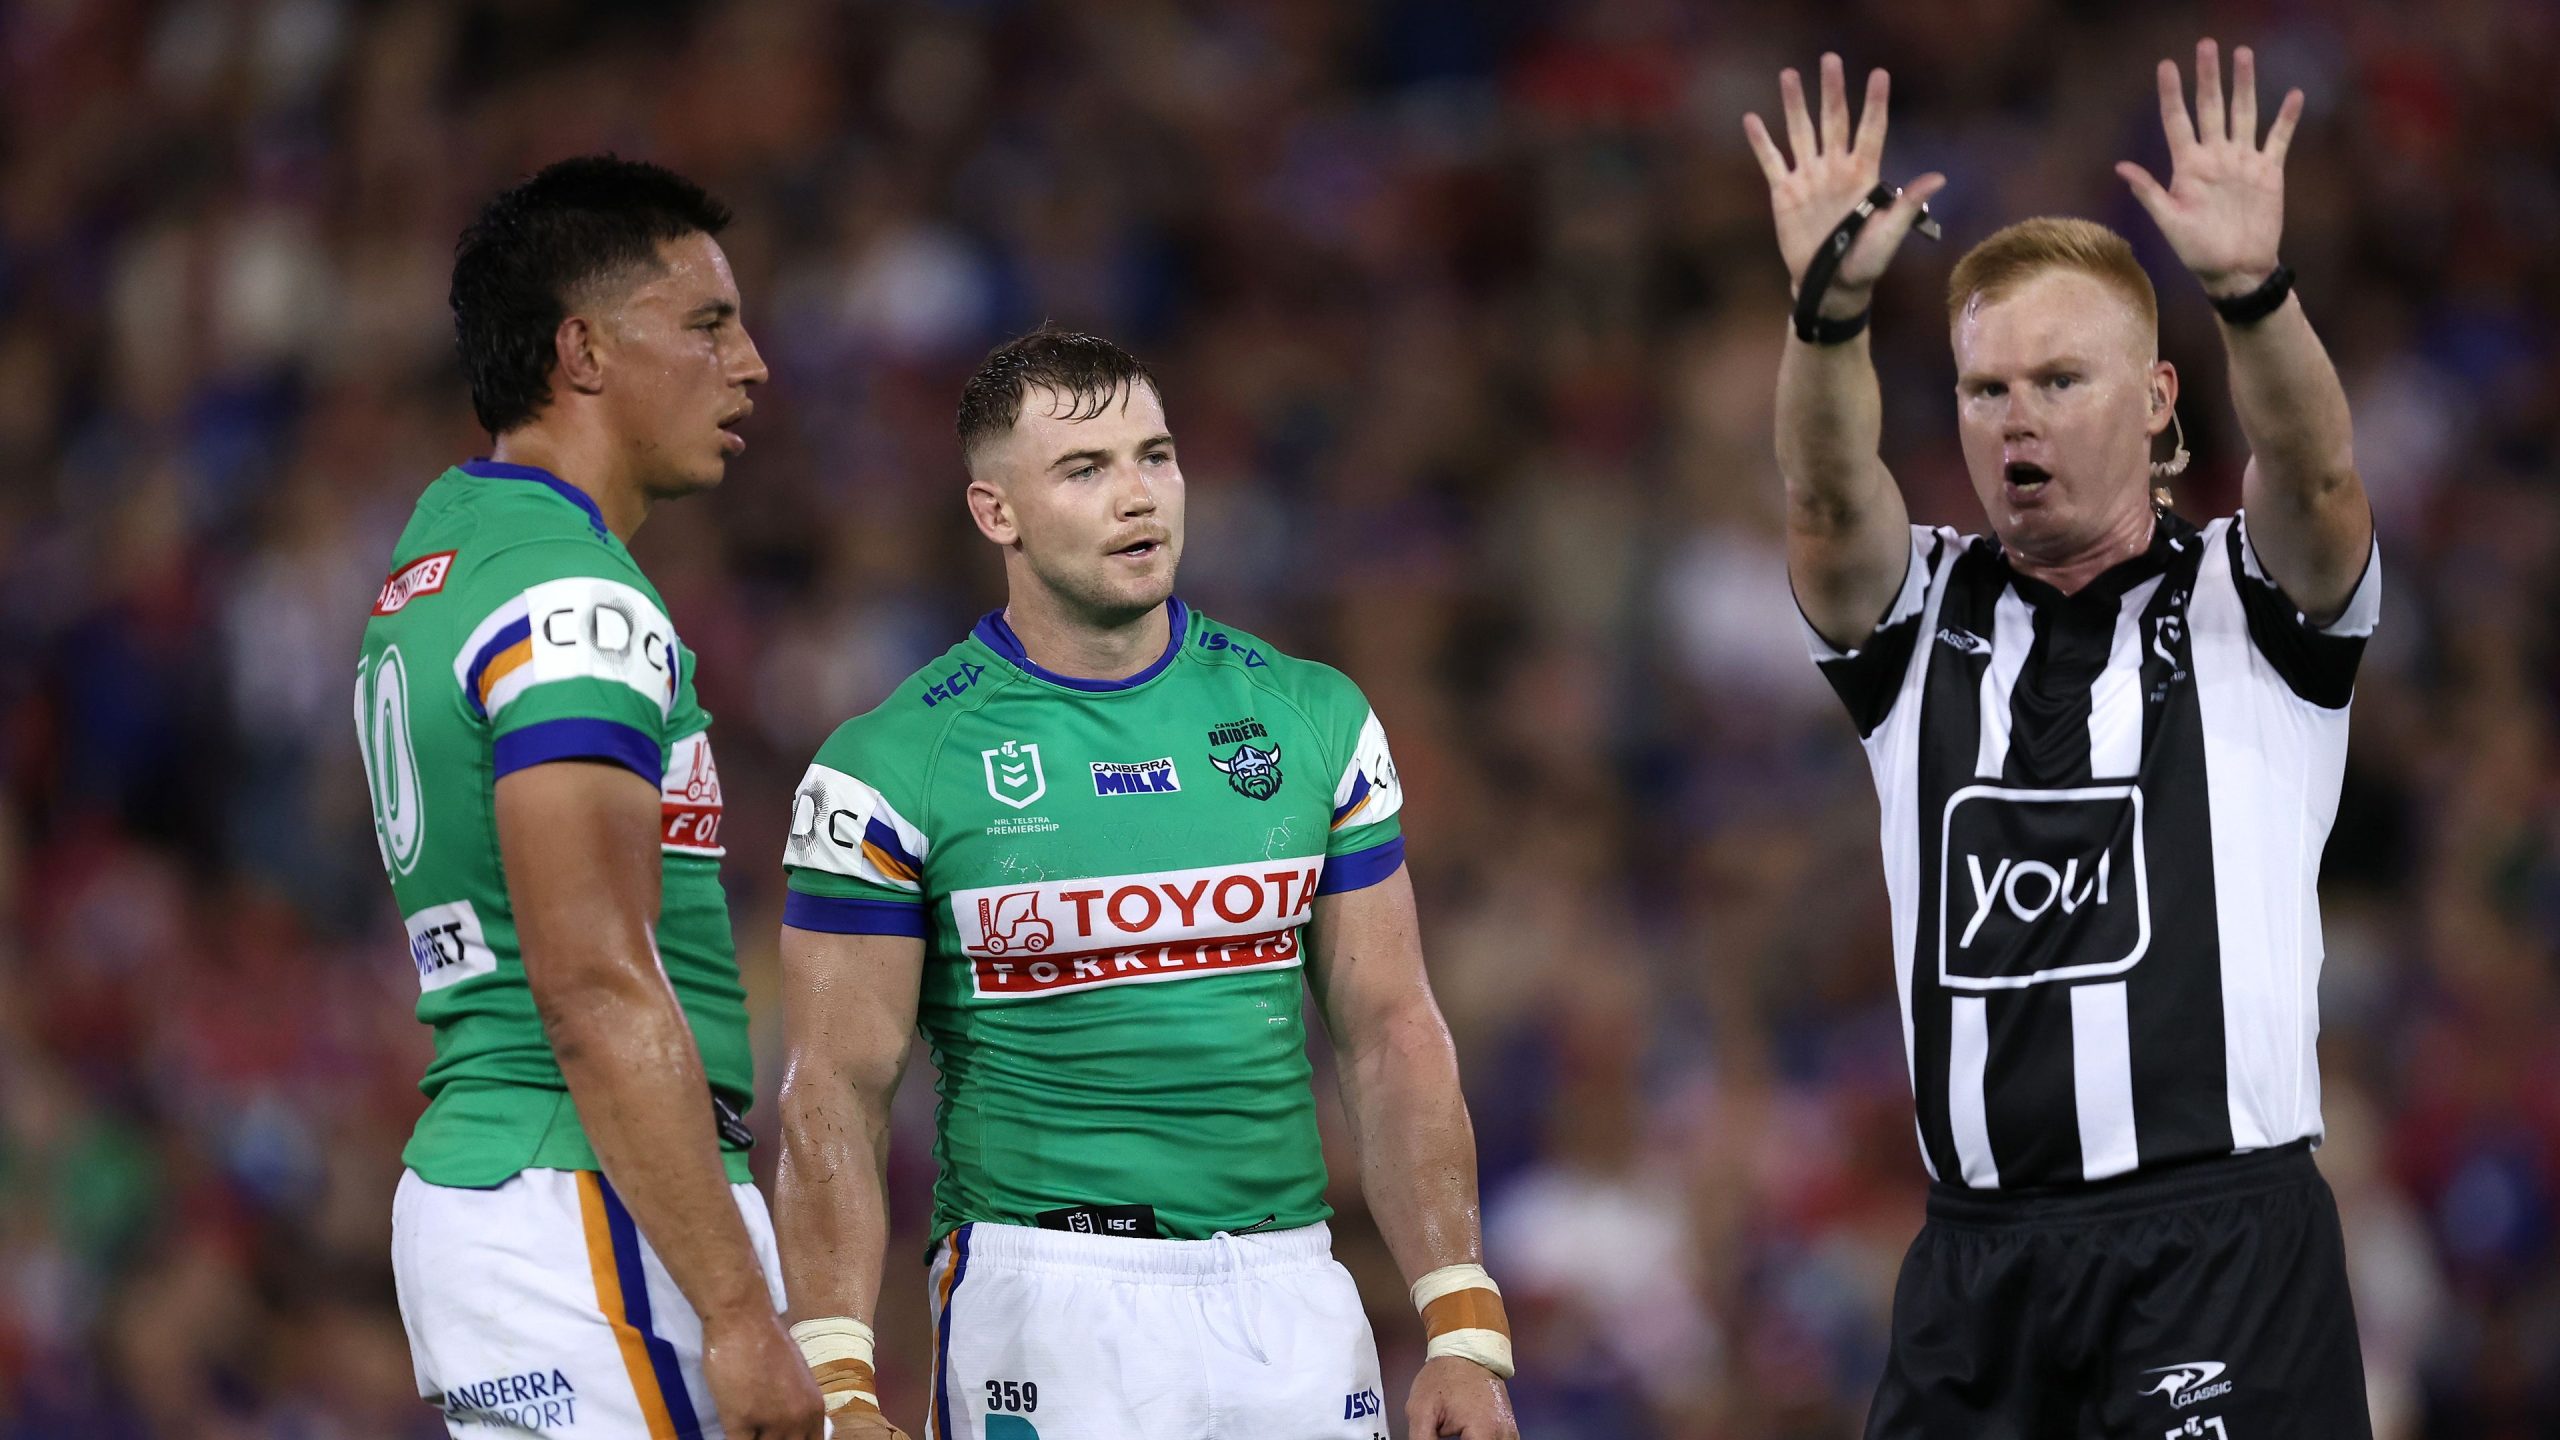 Stuart questions sin-bin for 'totally unnecessary' hit